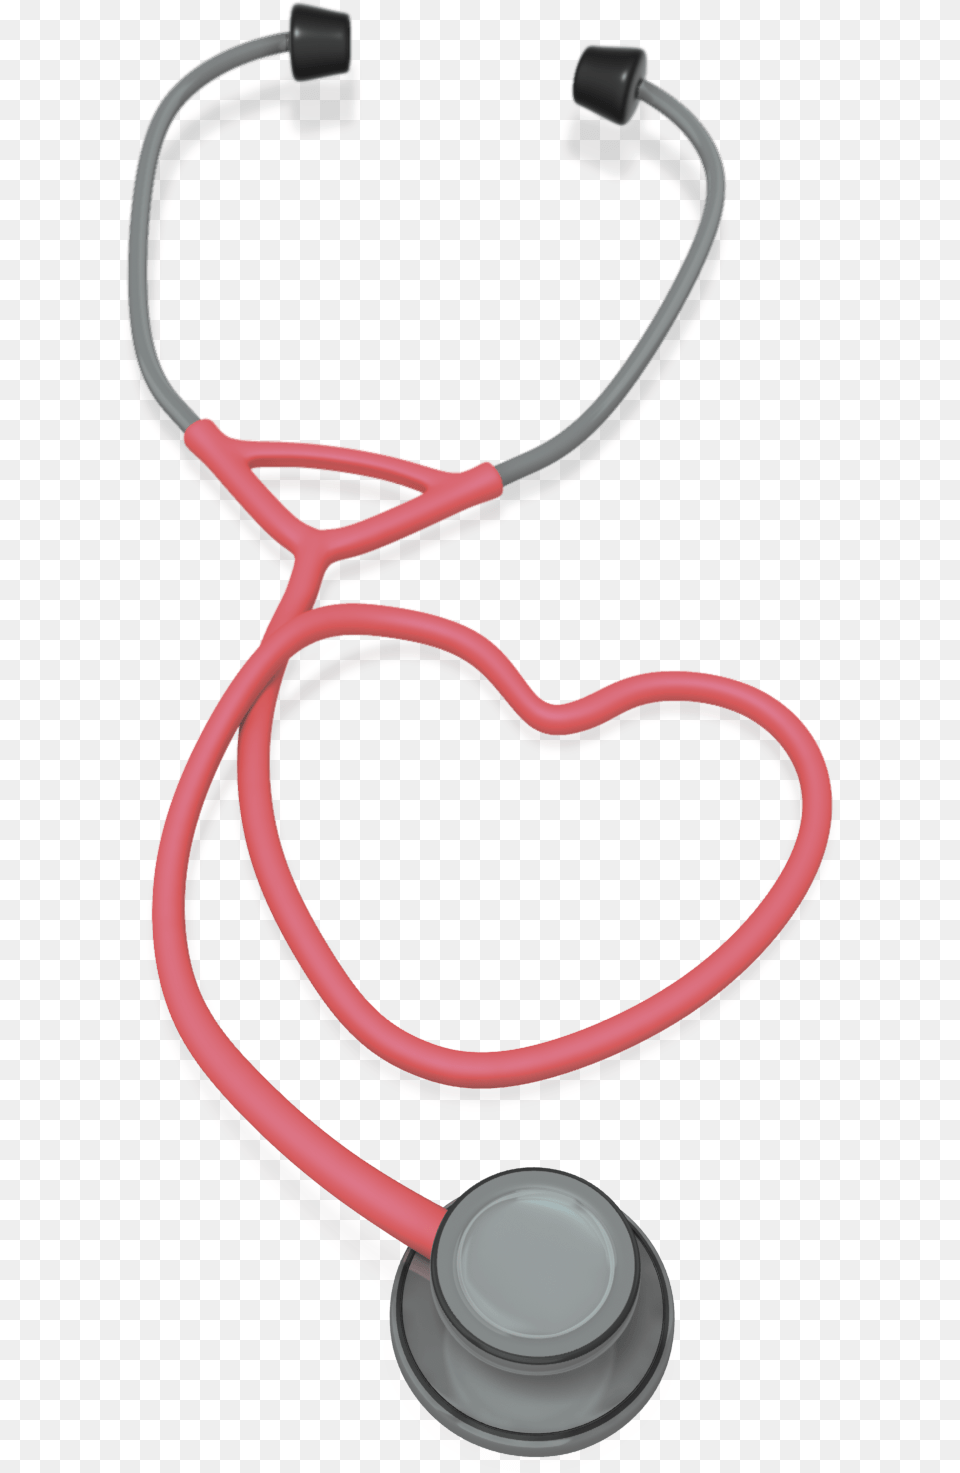 Stethoscope Transparent Background Stethoscope, Smoke Pipe Png